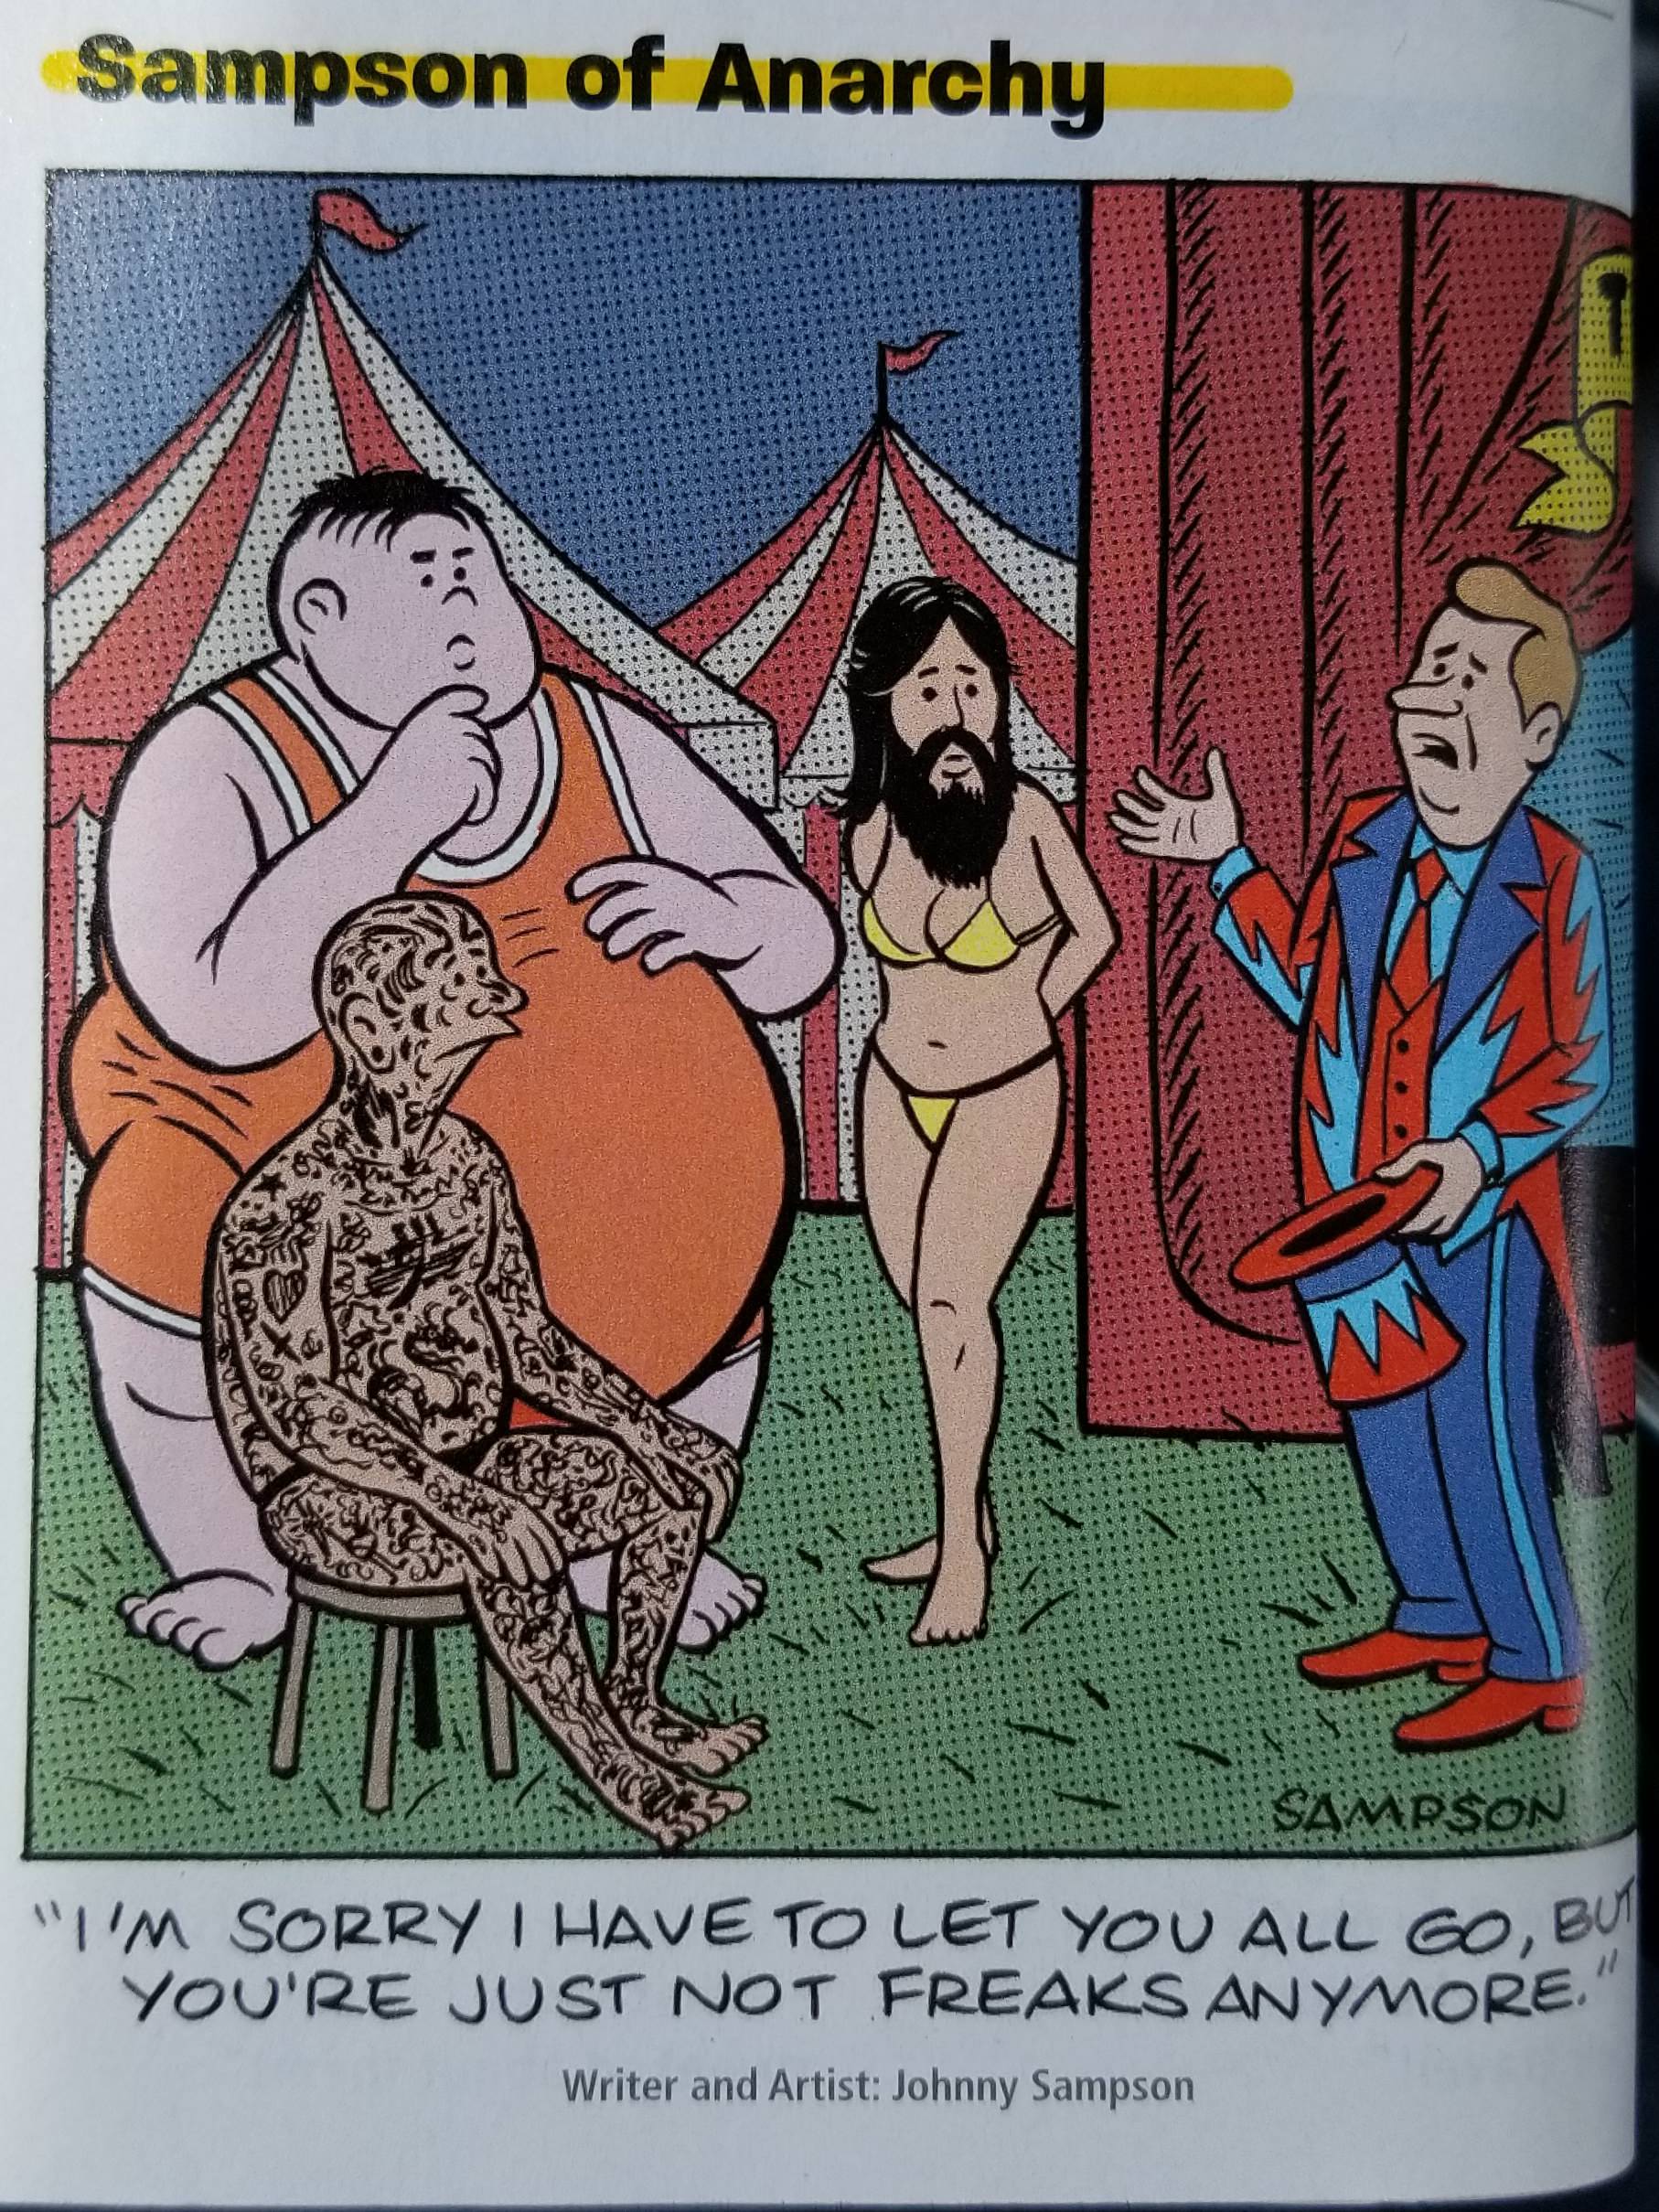 Funny sampson of anarchy cartoon about circus freaks being fired because they are not freaks anymore.